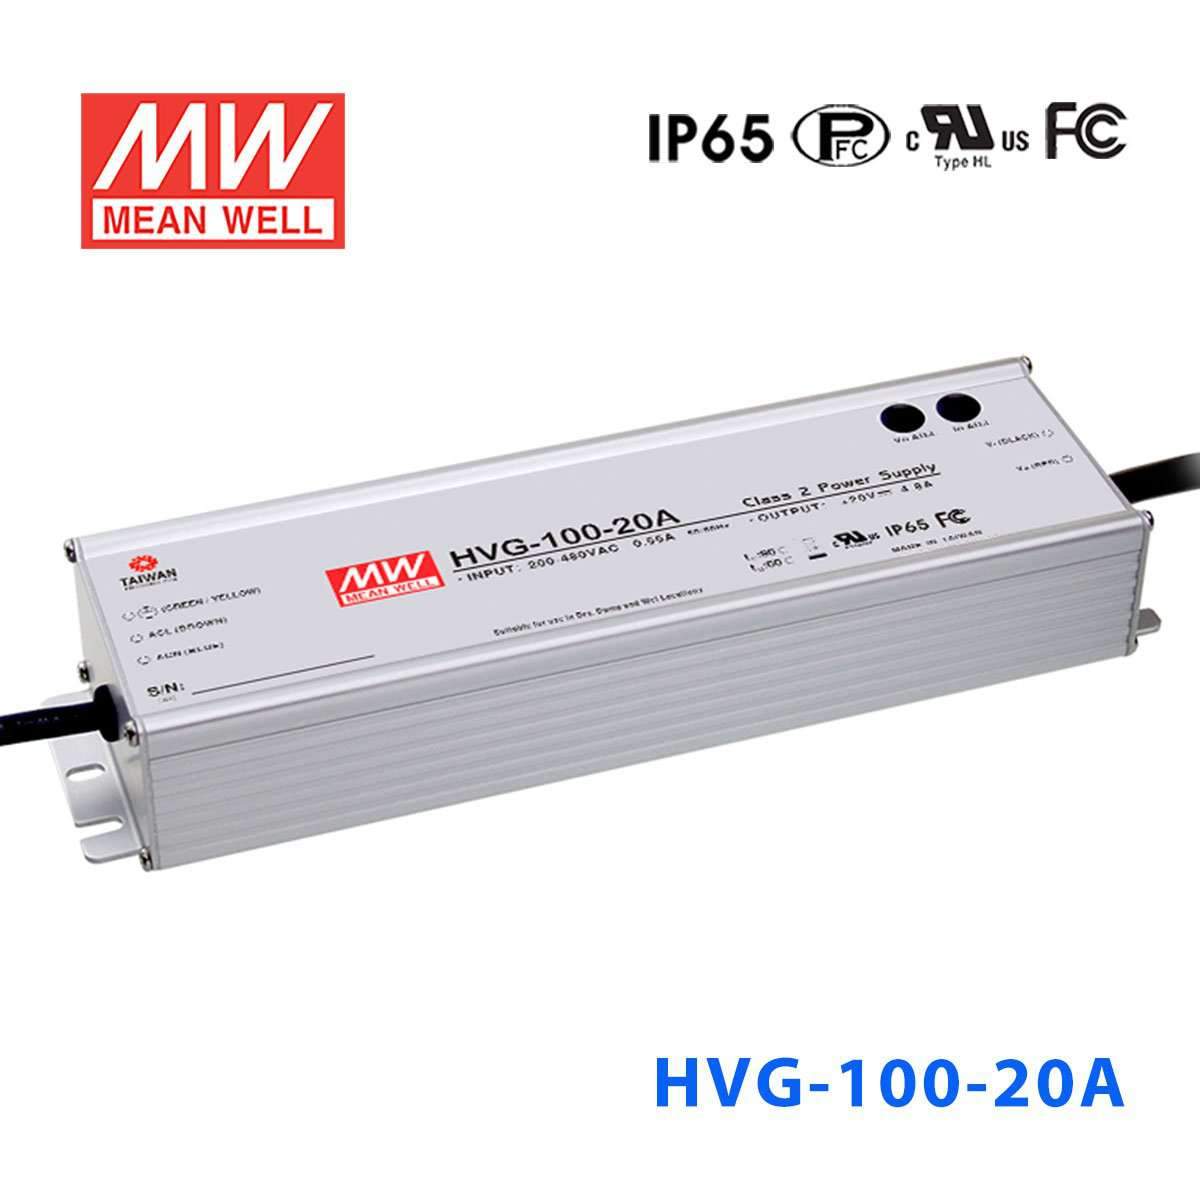 Mean Well HVG-100-20A Power Supply 100W 20V - Adjustable